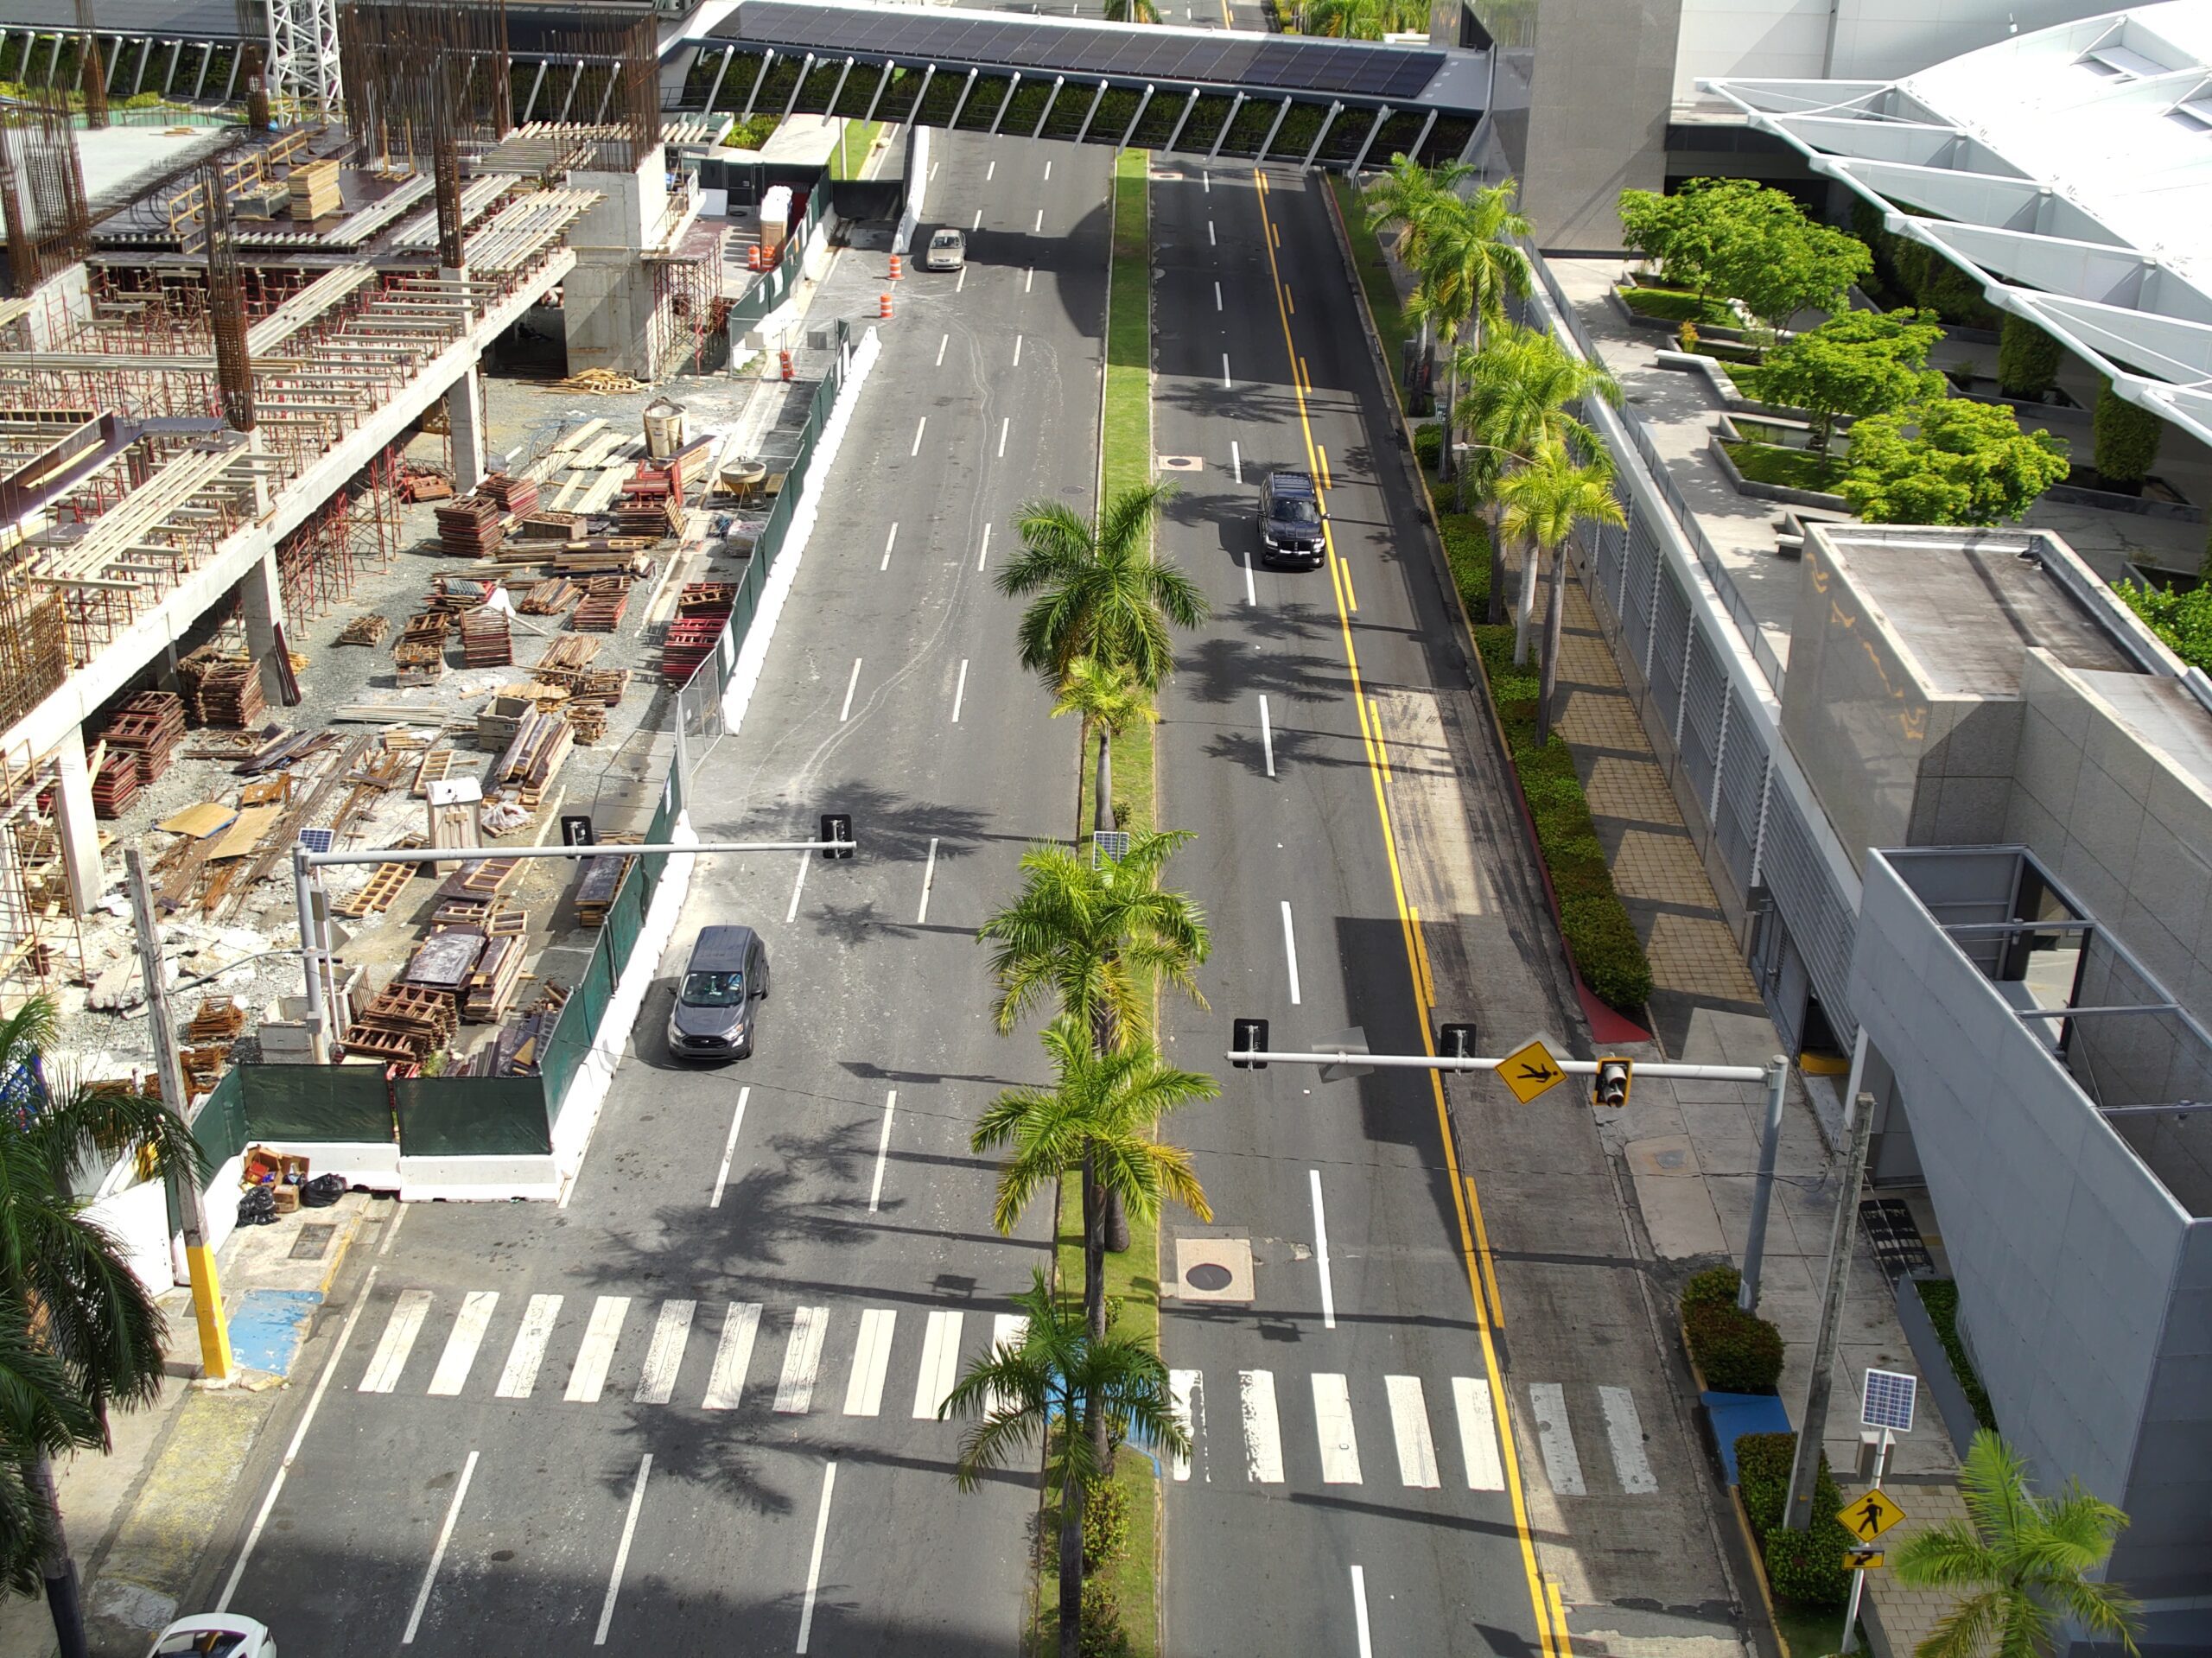 S1016638 A front view from building roof showing road with 3 cars and a under construction building on left side of the road